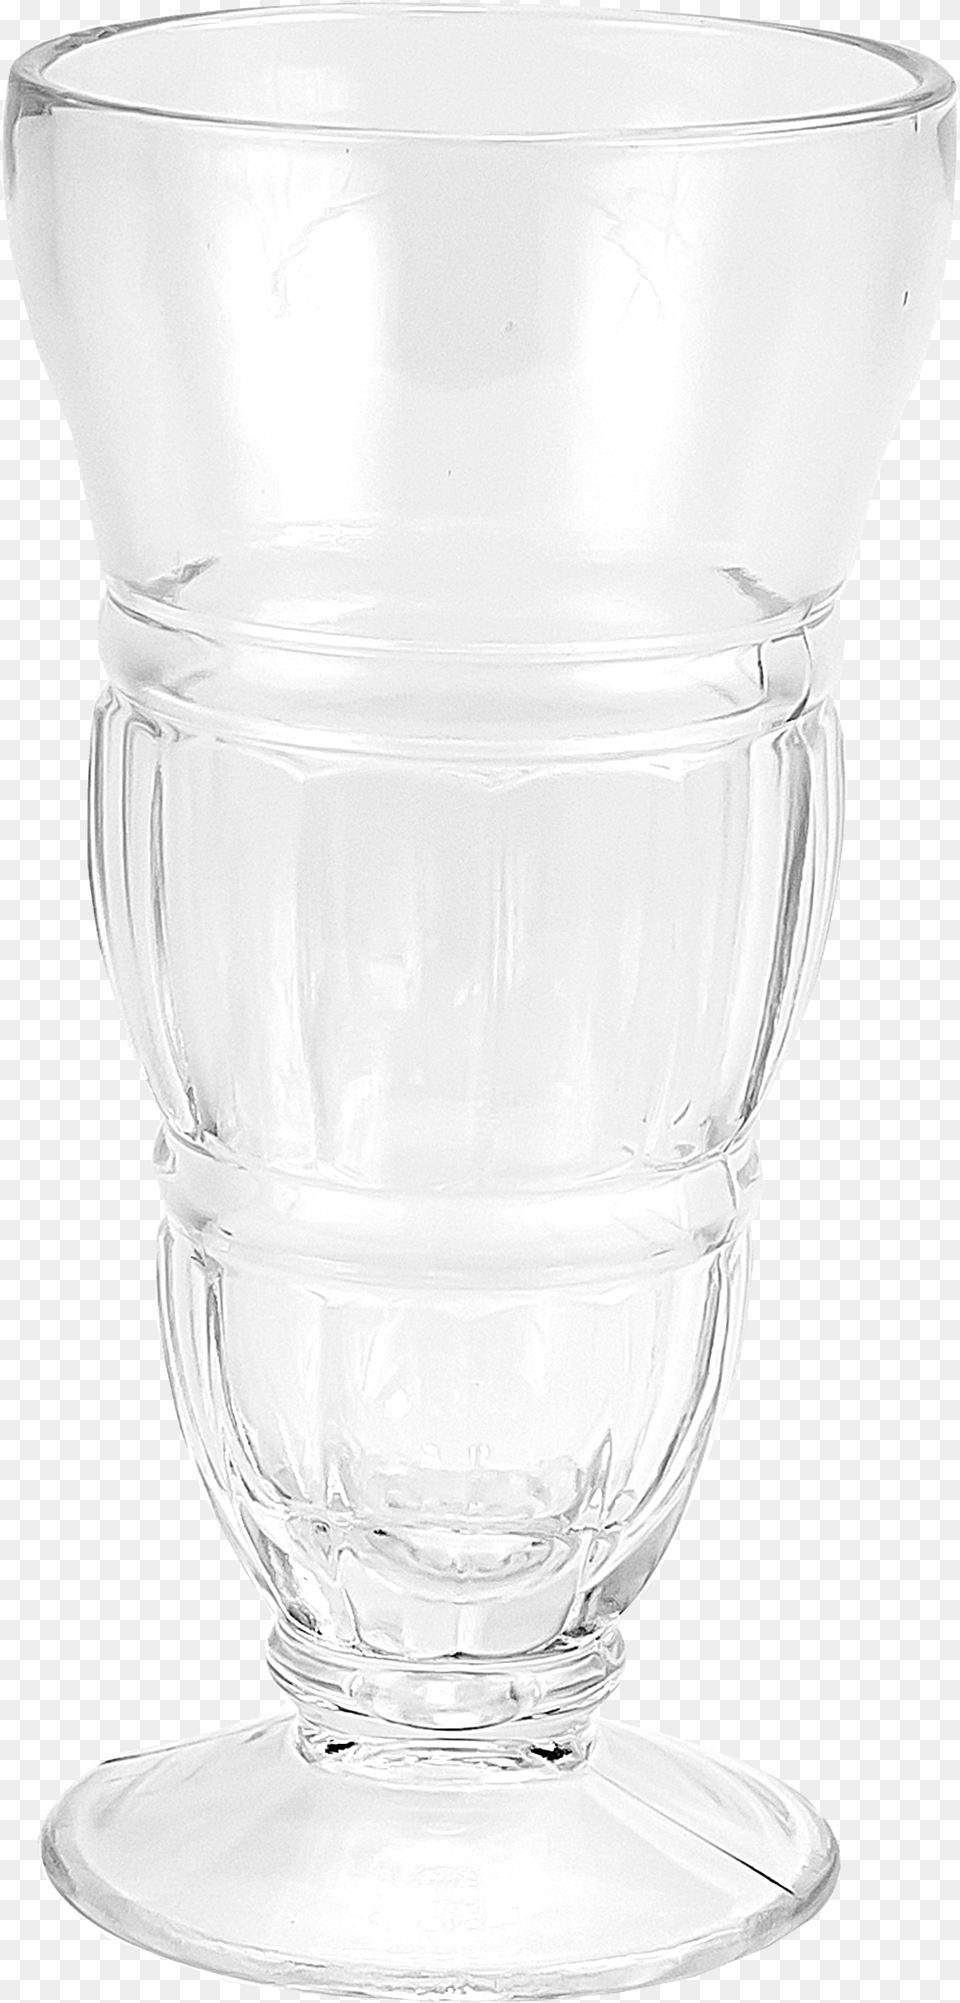 Soda Glass Champagne Glass, Bowl, Mixing Bowl, Bottle, Shaker Png Image